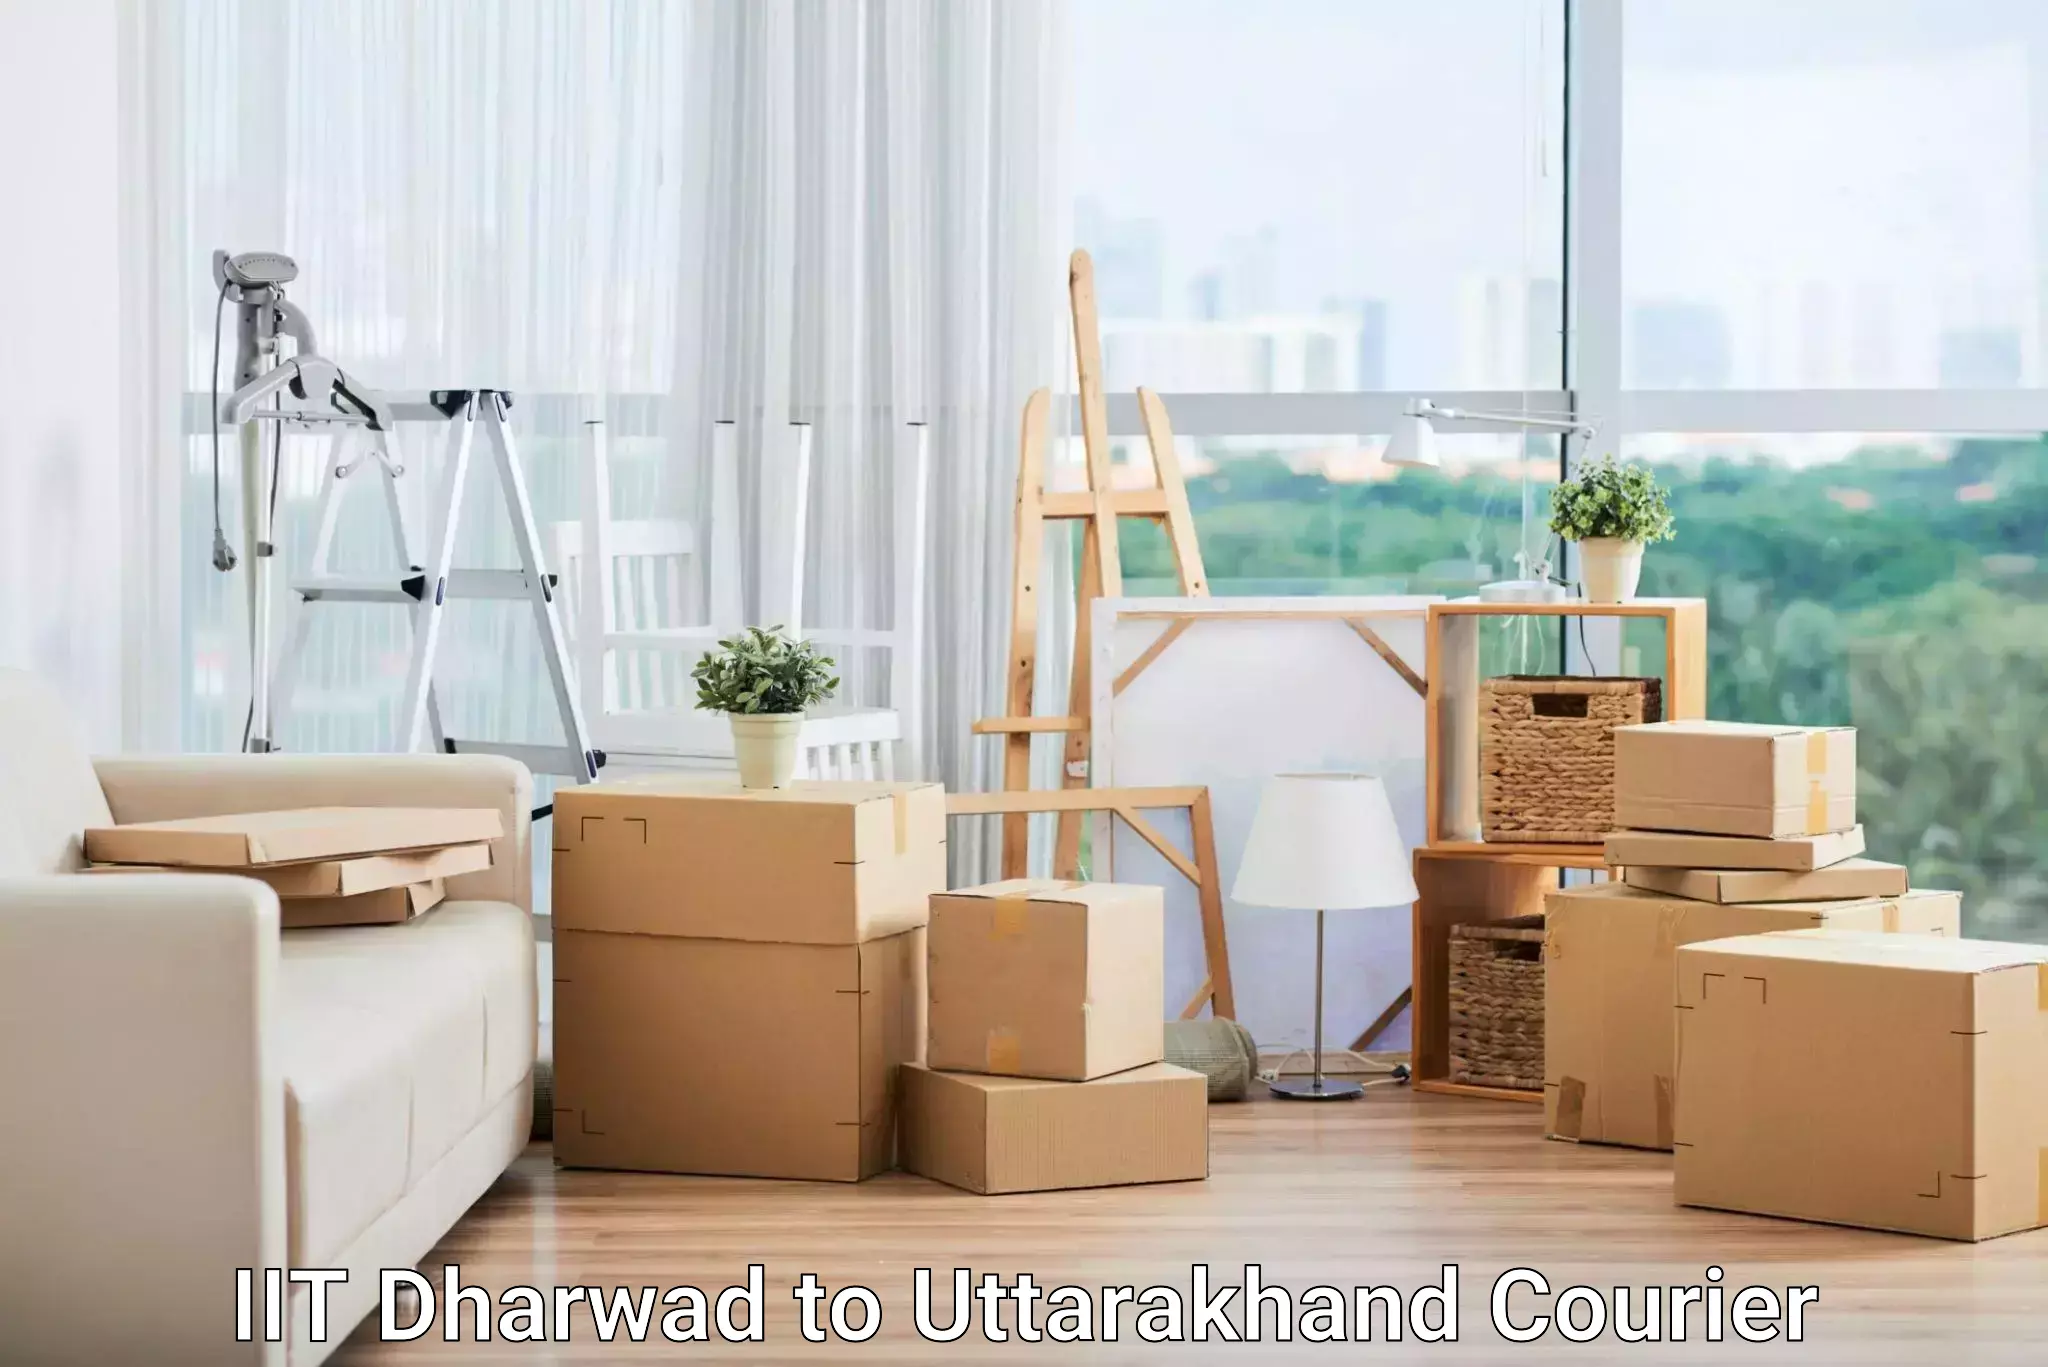 Full-service courier options IIT Dharwad to Haridwar